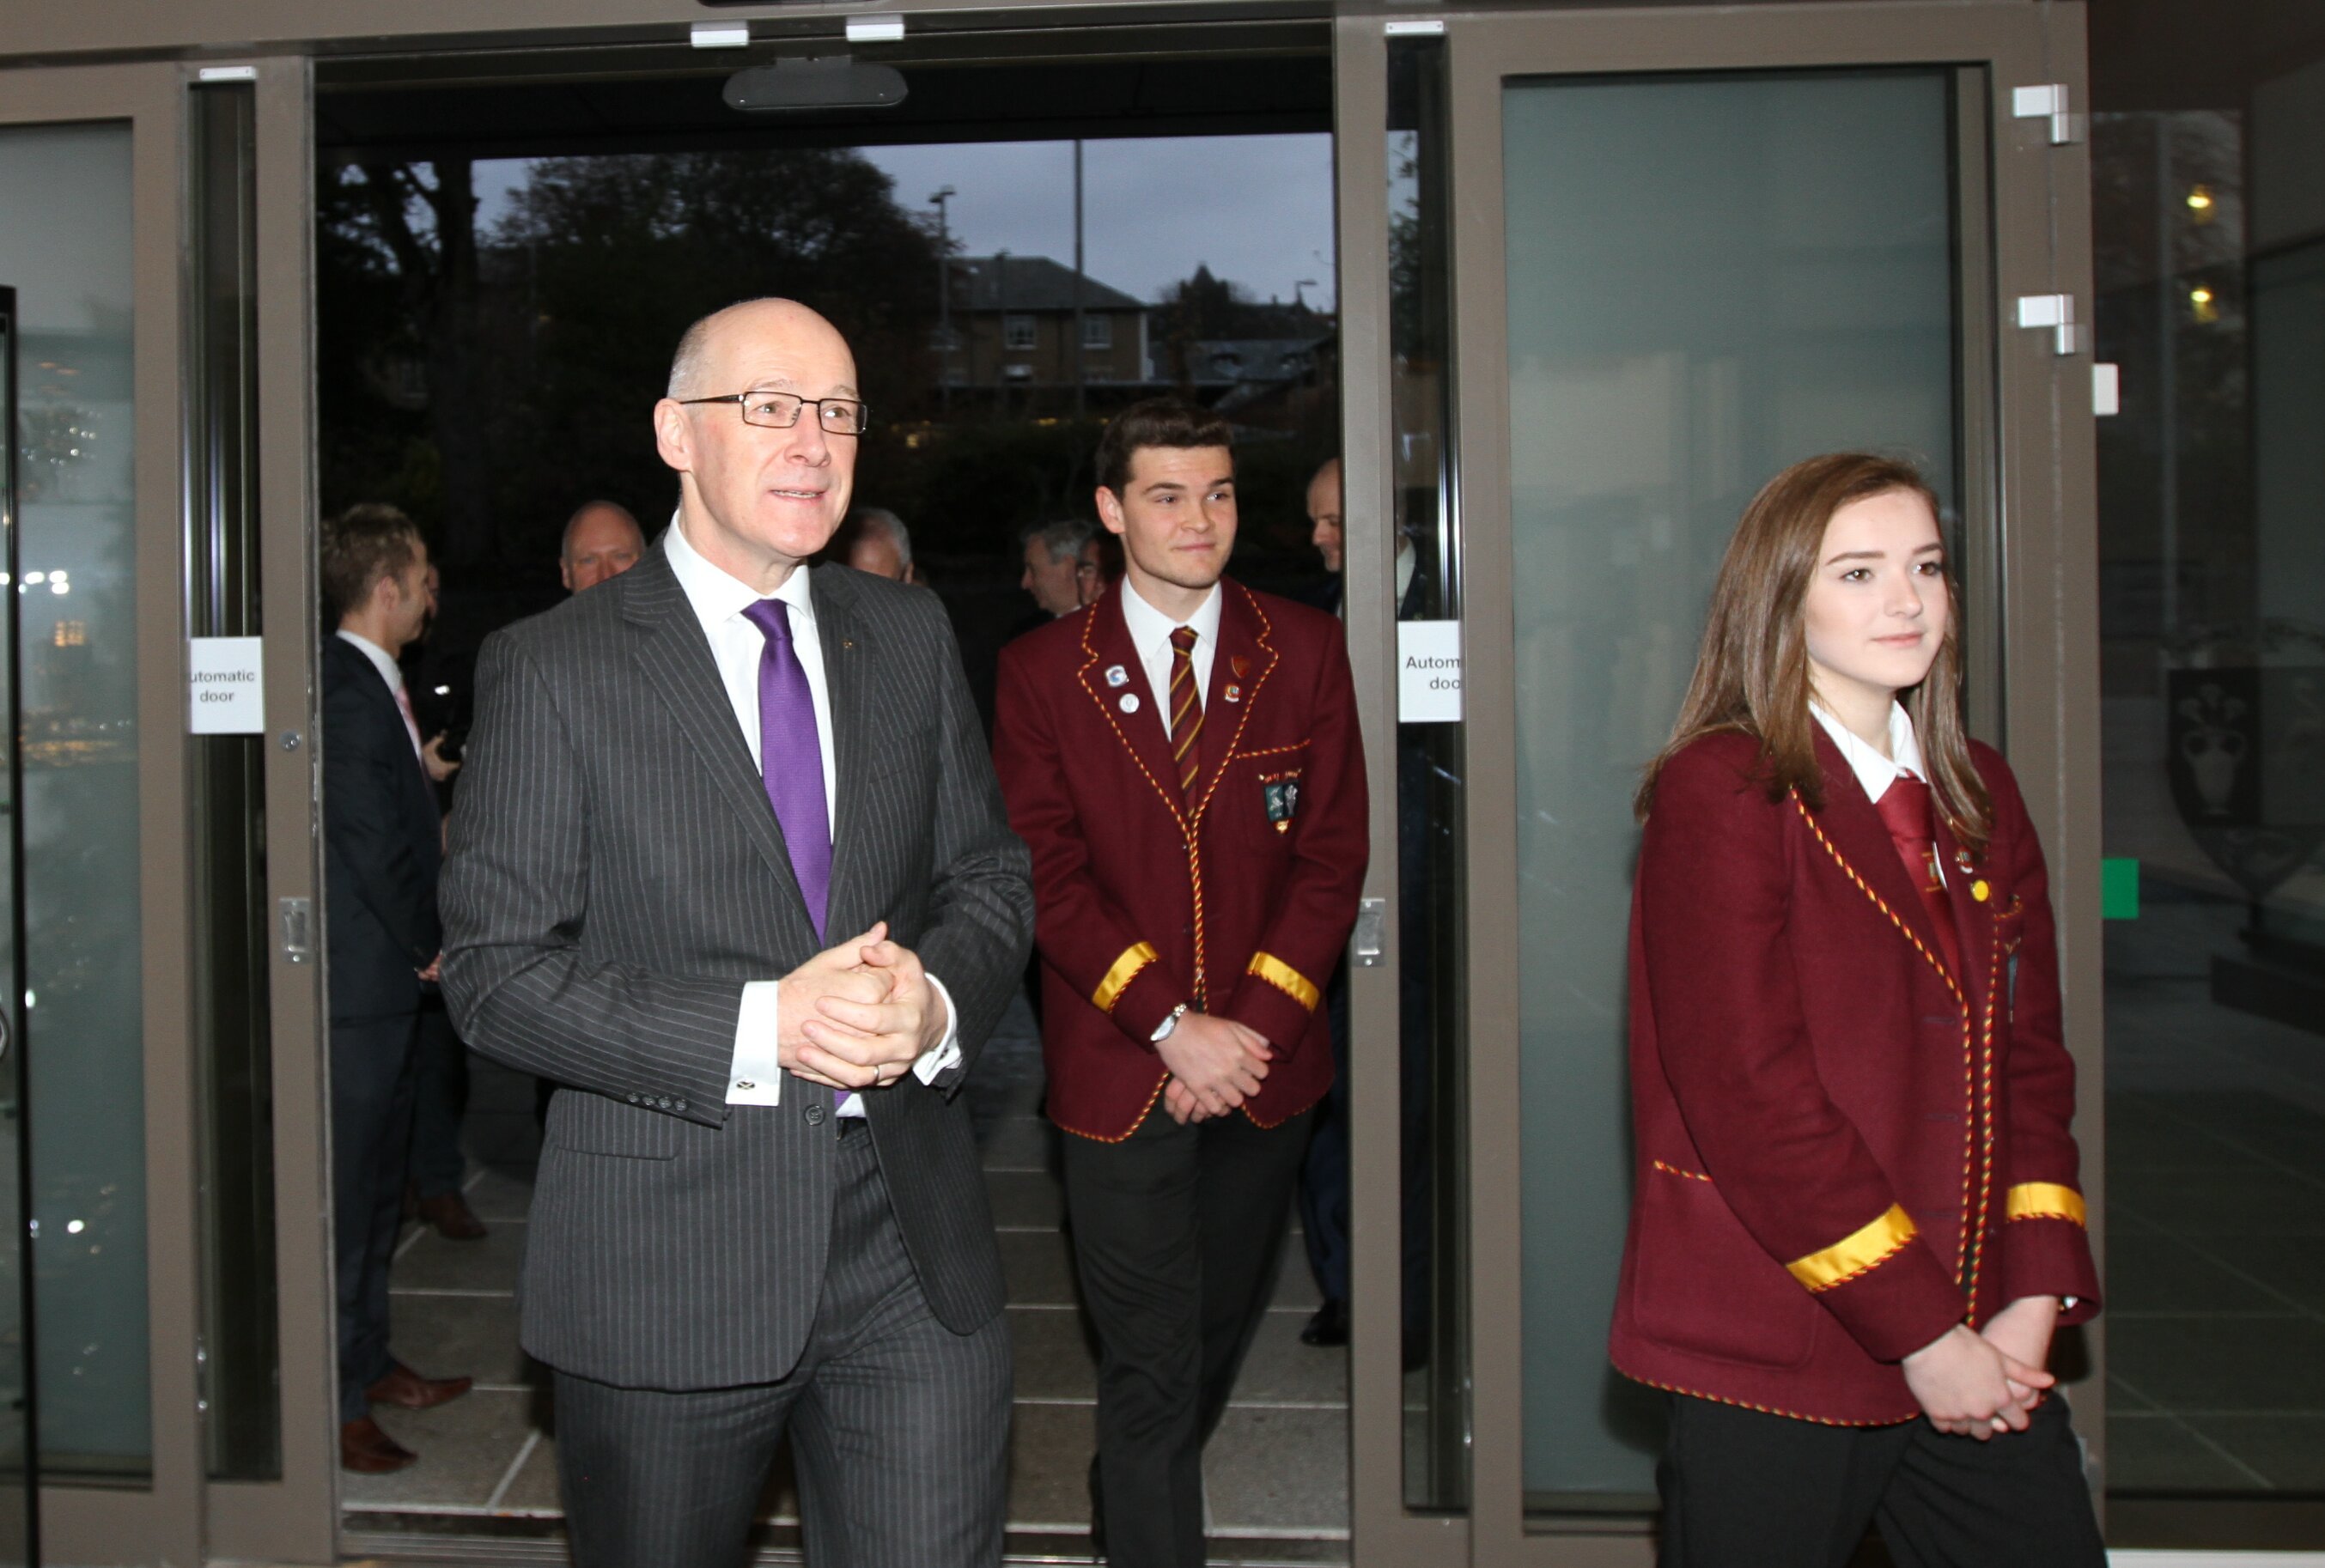 Mr Swinney on his visit to officially open the new Harris Academy.